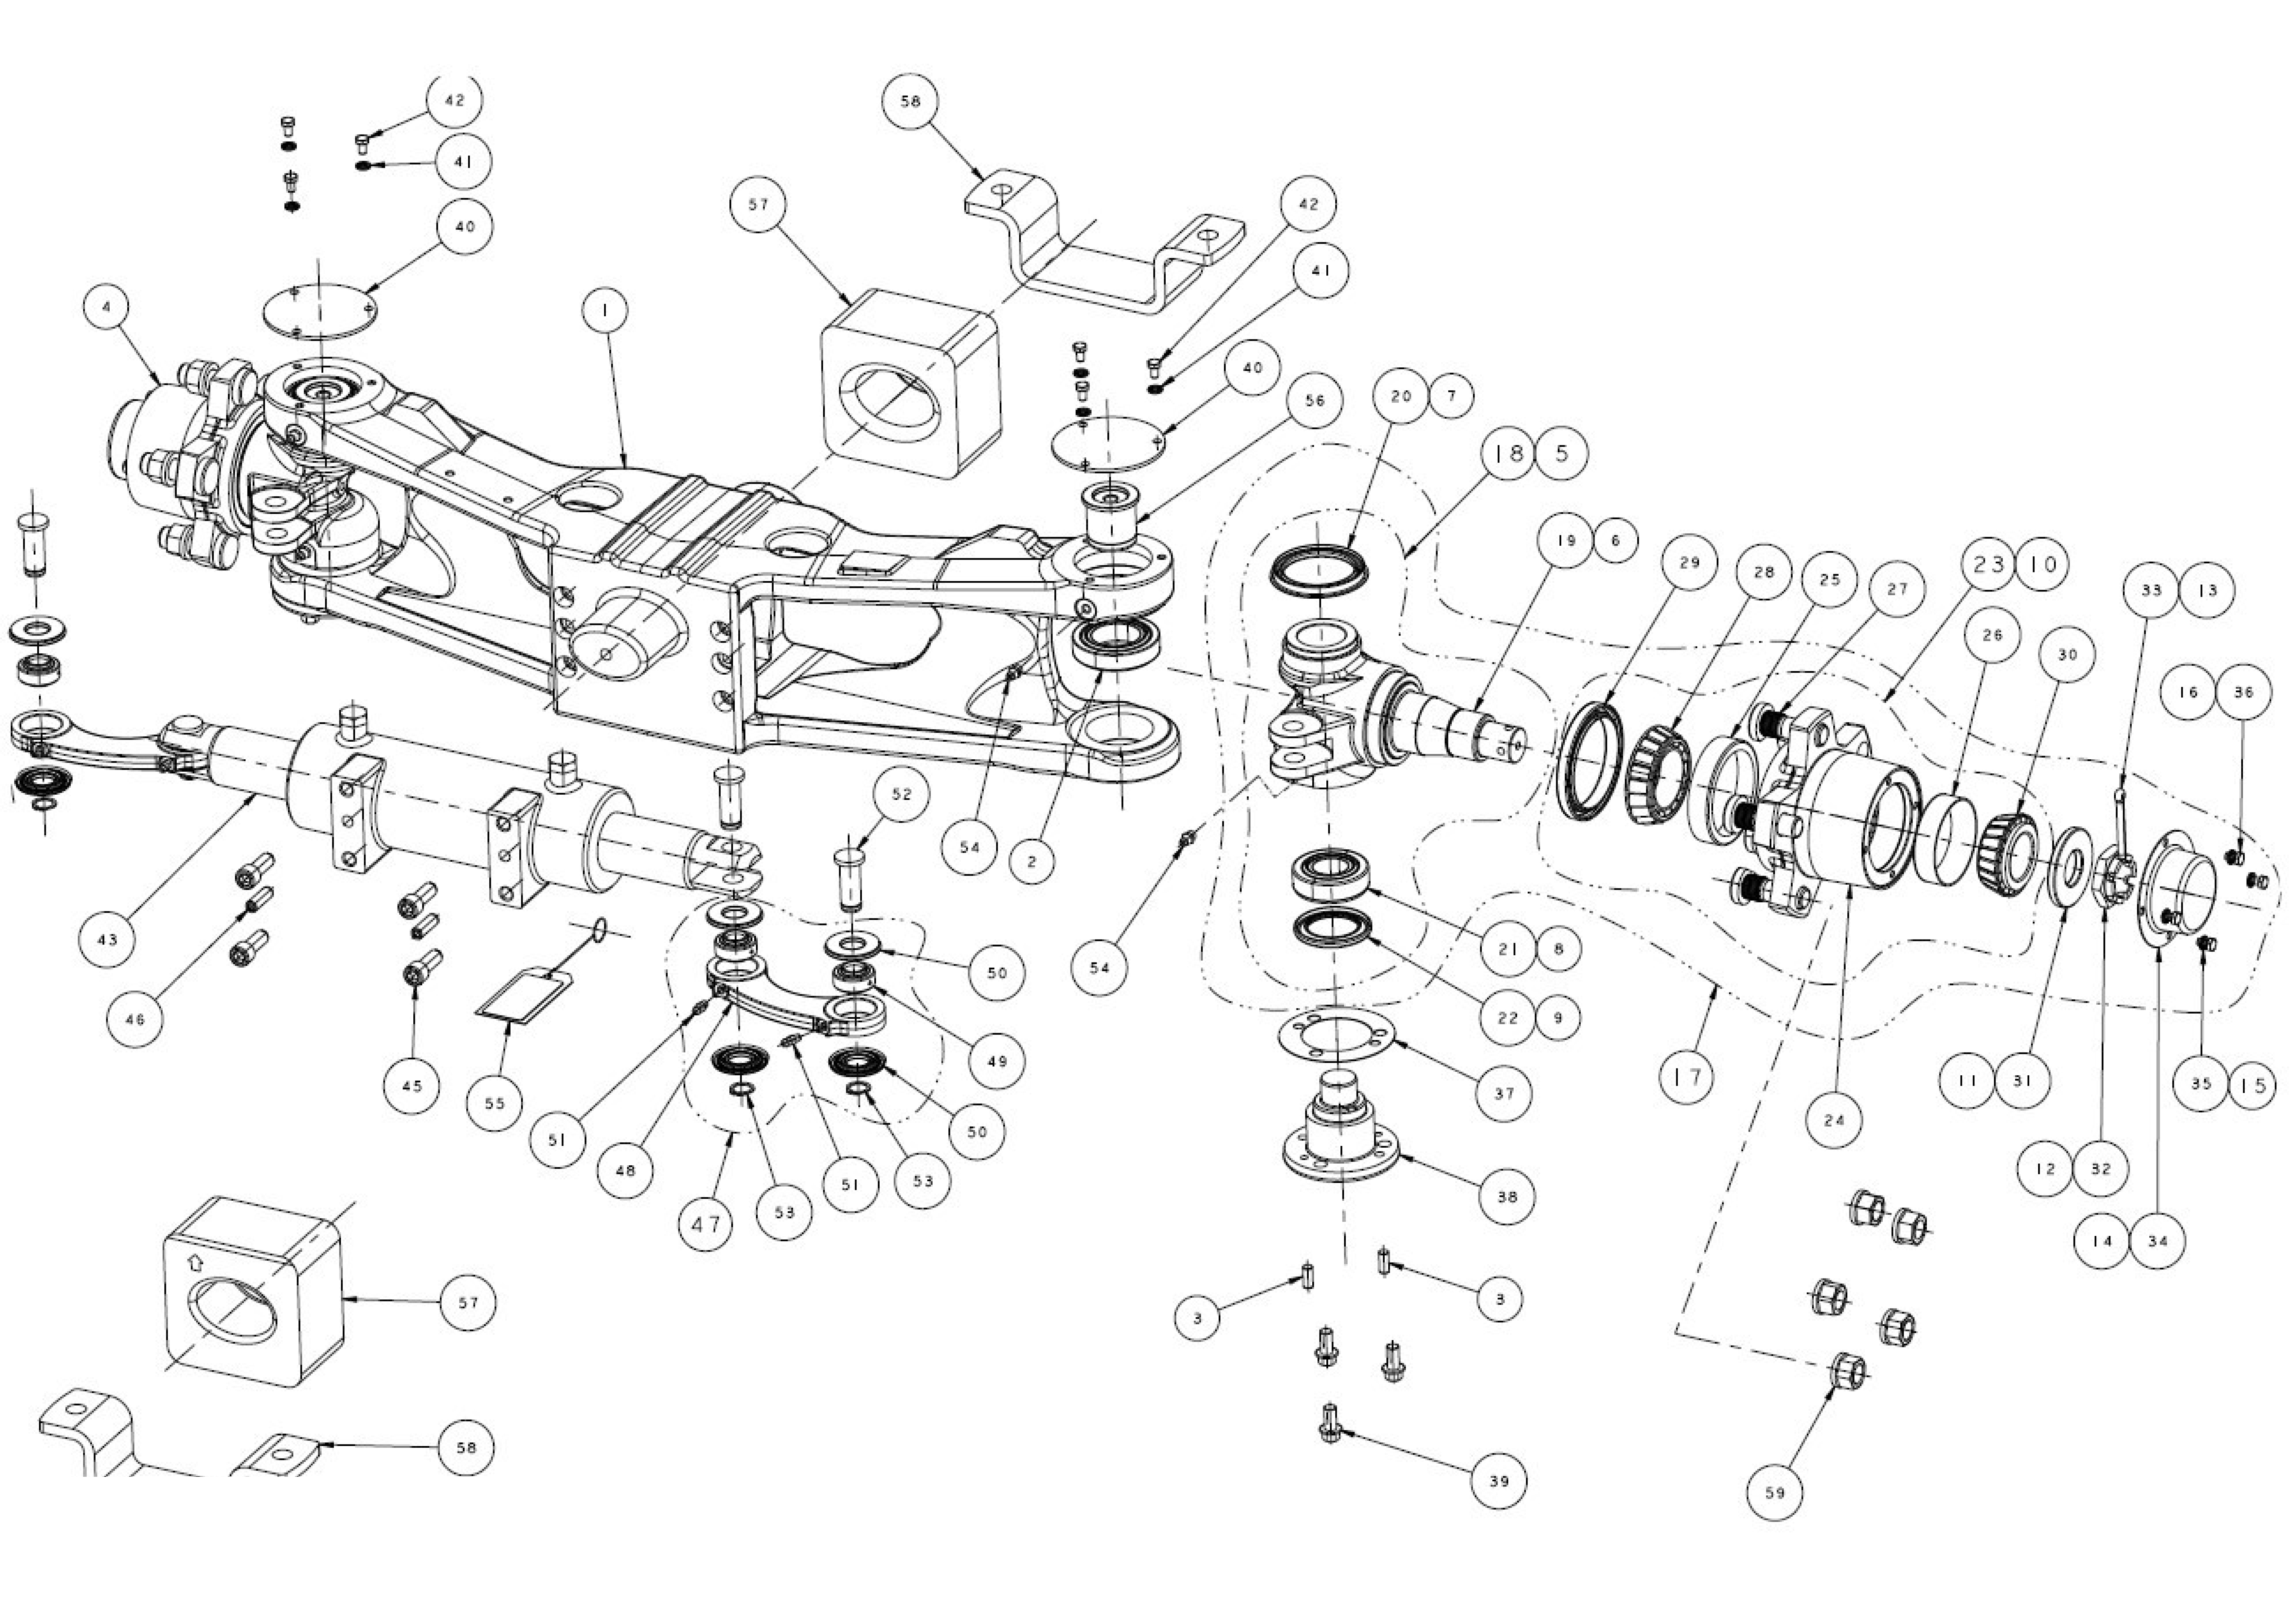 drawing for TIGERCAT 207091 - FITTING (figure 1)